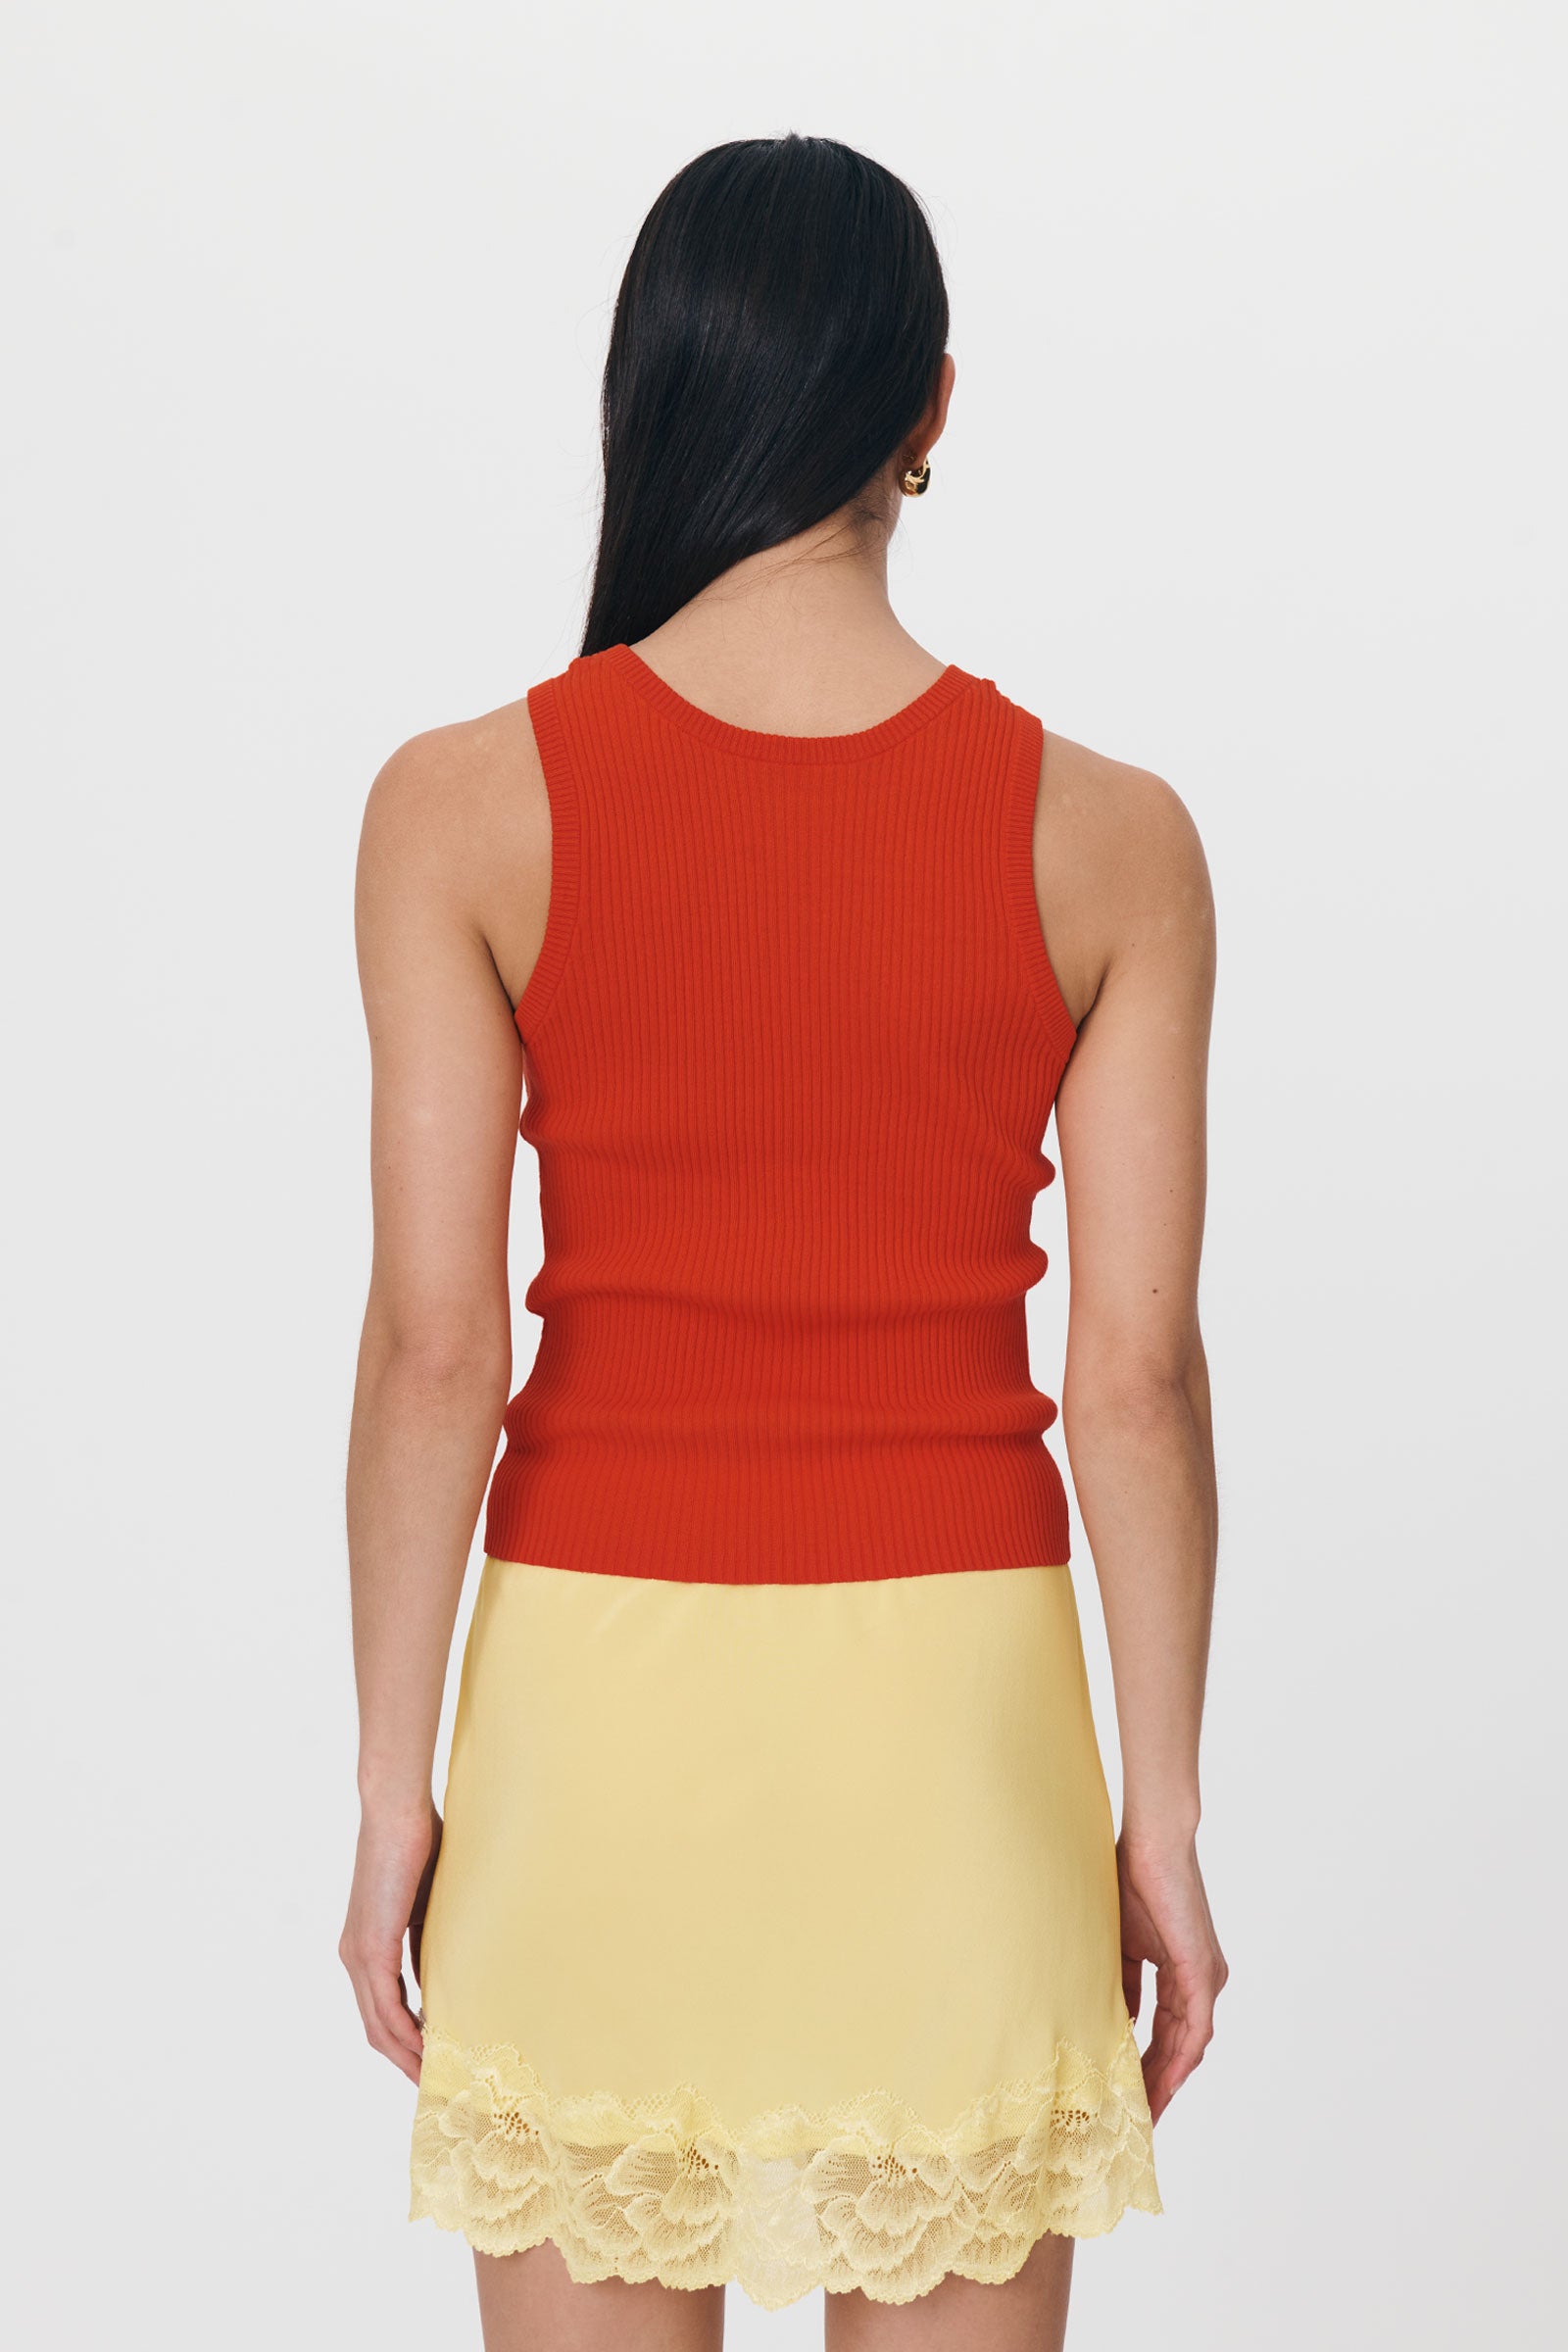 Avery Knit Tank - Aperol Red